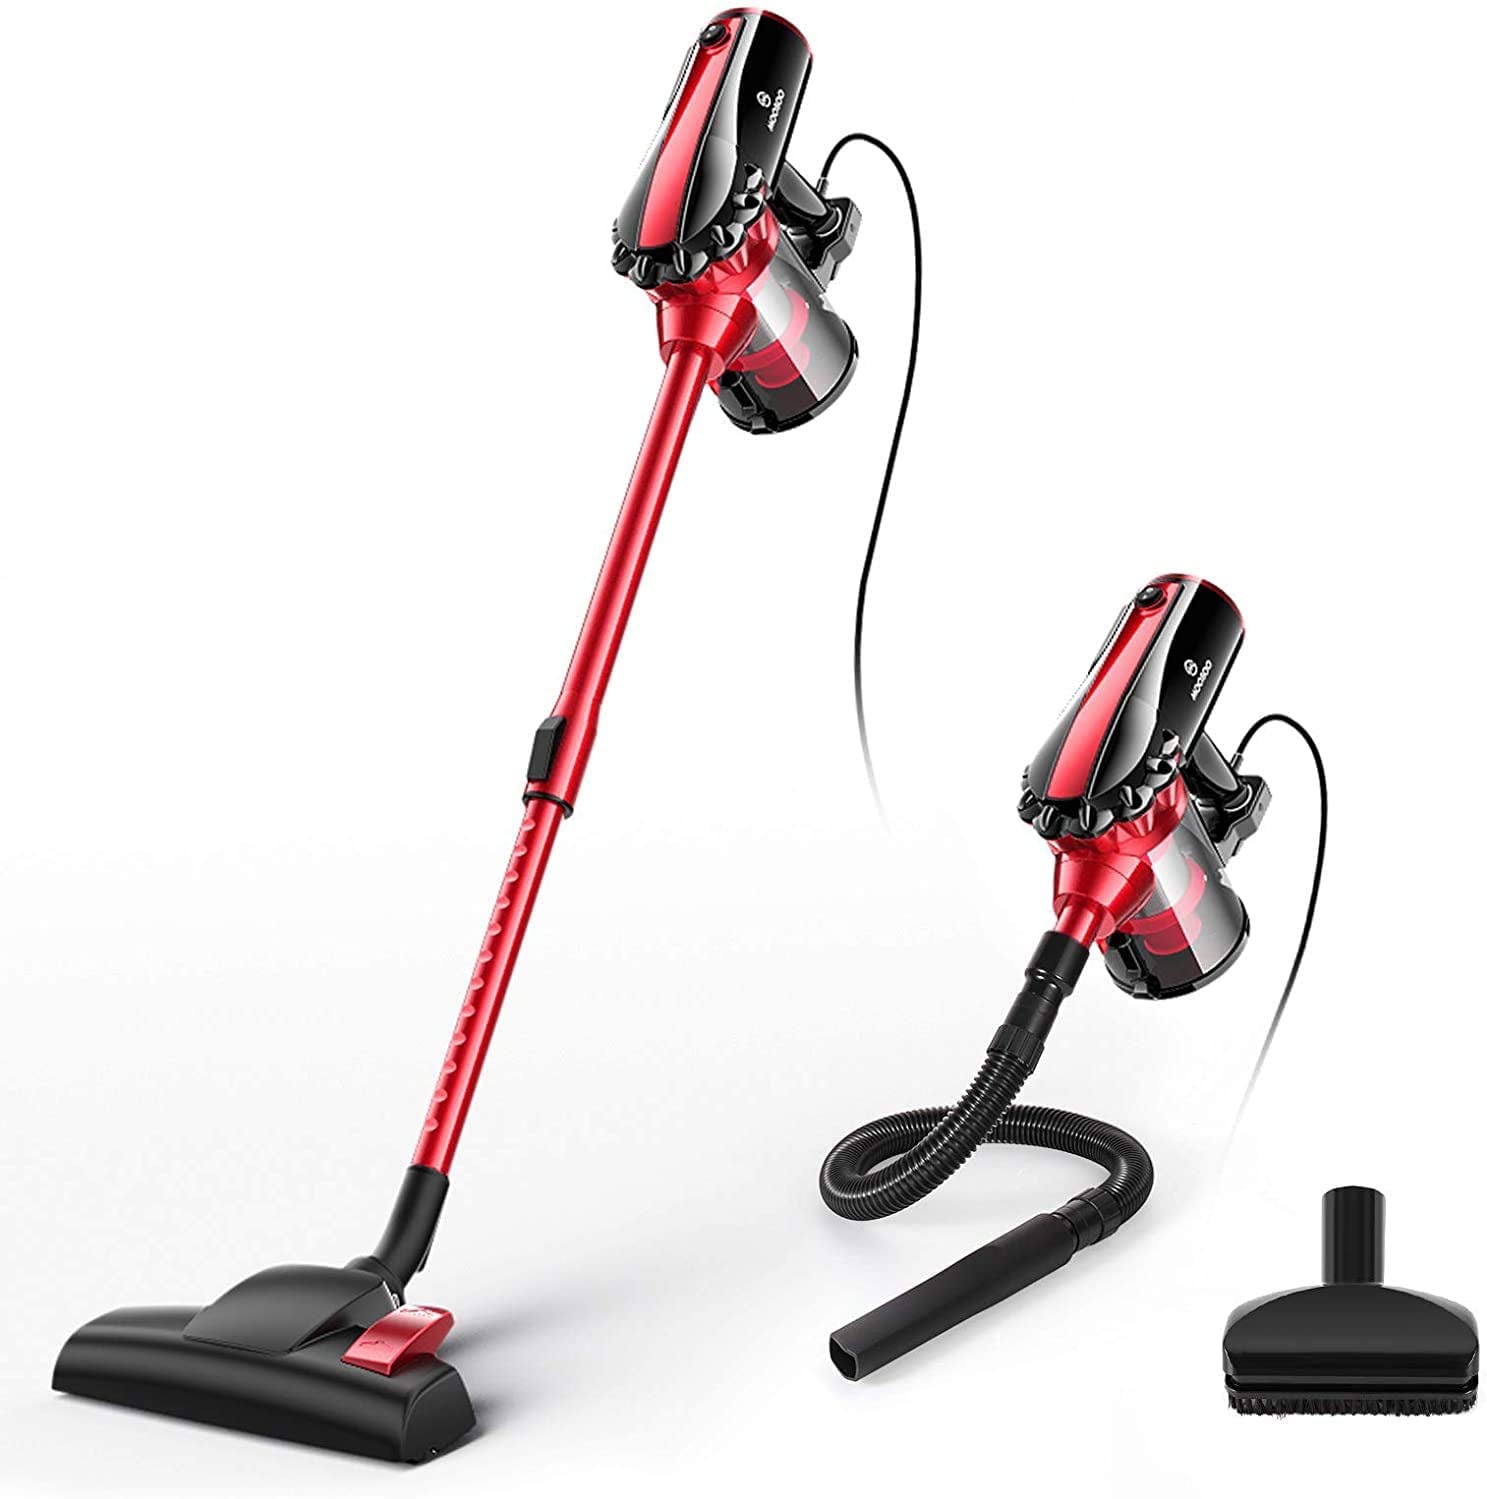 Samsung MOOSOO Vacuum Cleaner, 17KPa Strong Suction 4 in 1 Corded Stick